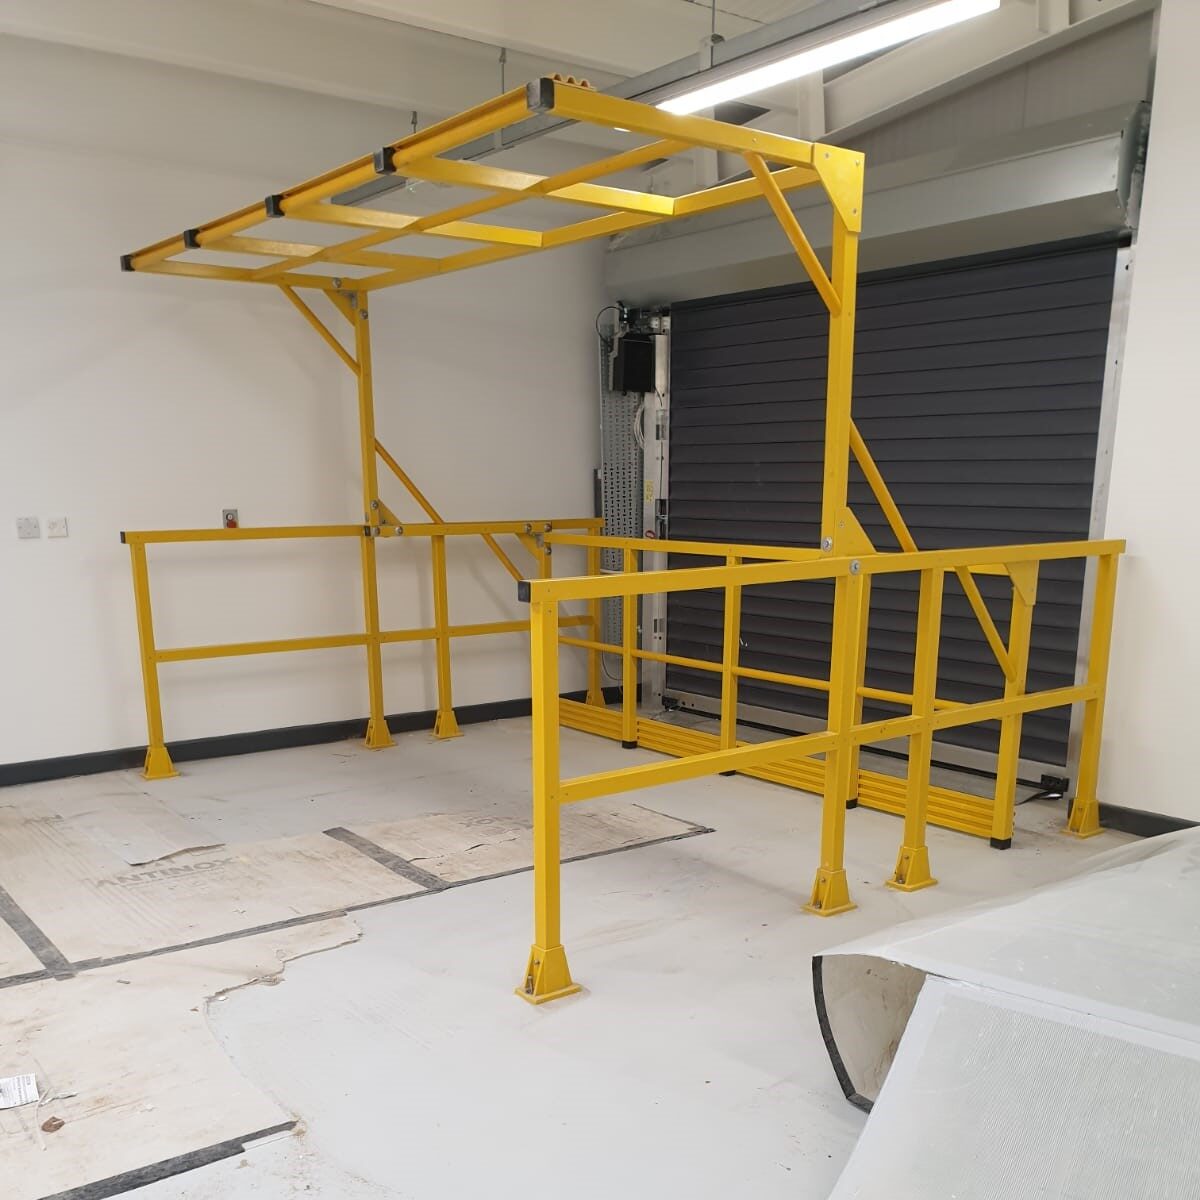 Yellow GRP Pallet Gate in front of closed shutter doors